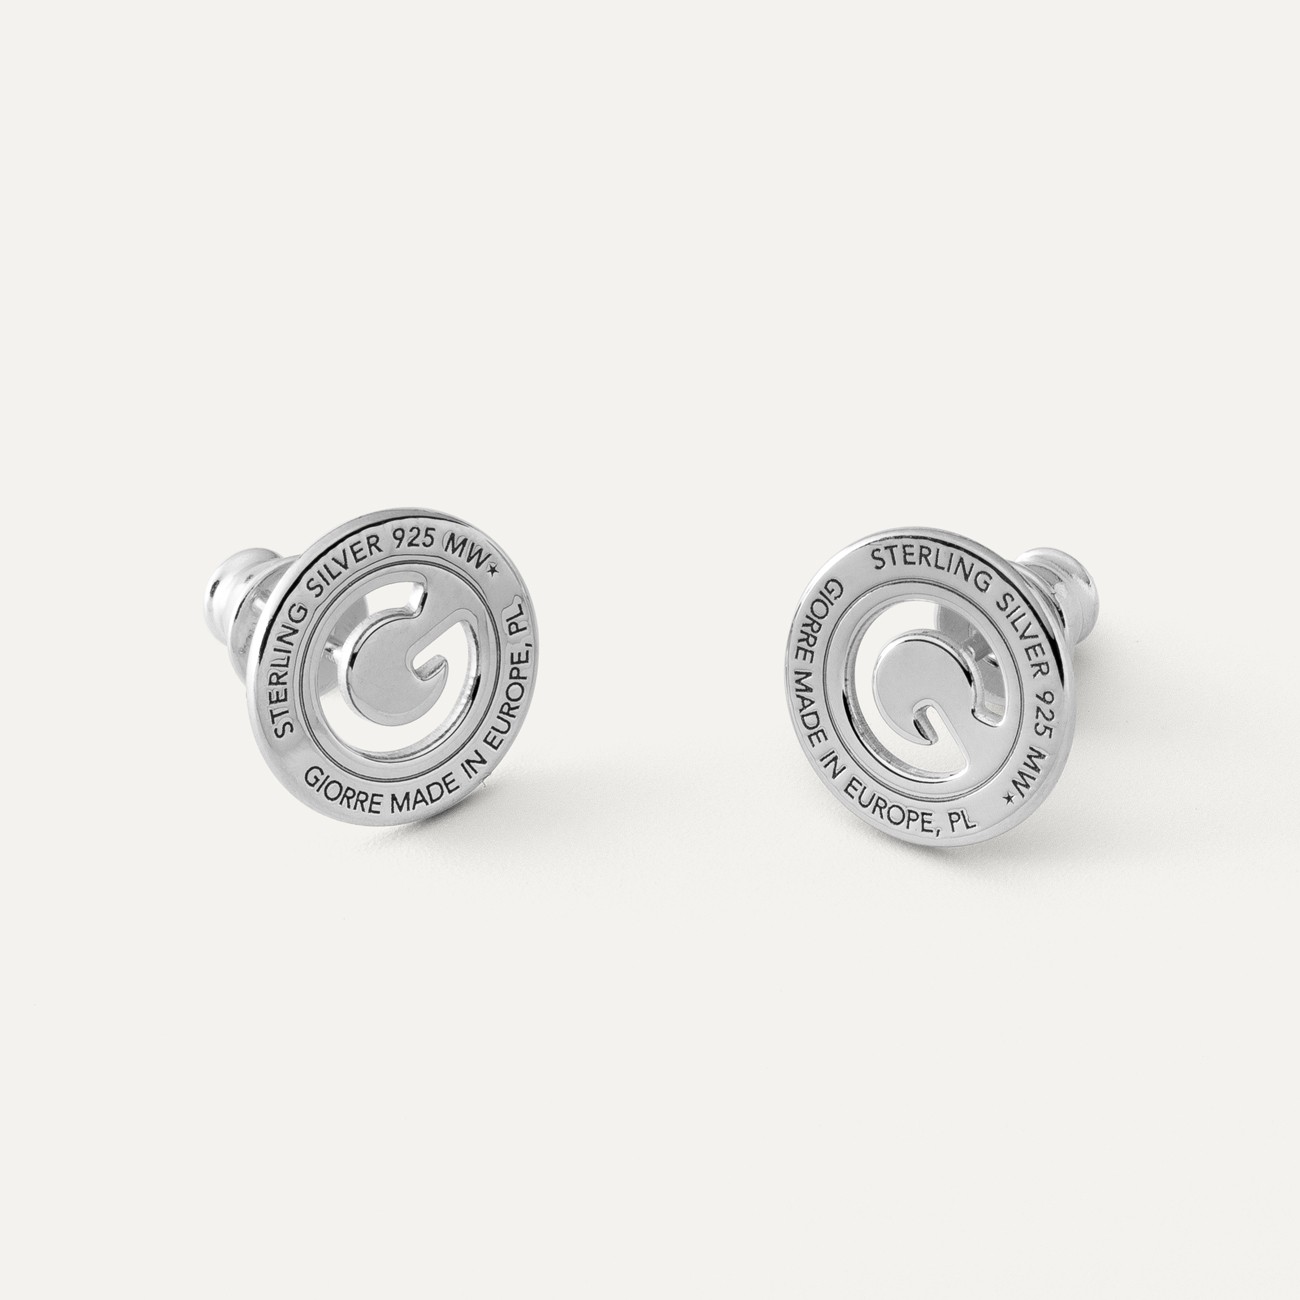 EARRINGS GIORRE BRAND, STERLING SILVER (925) RHODIUM OR GOLD PLATED